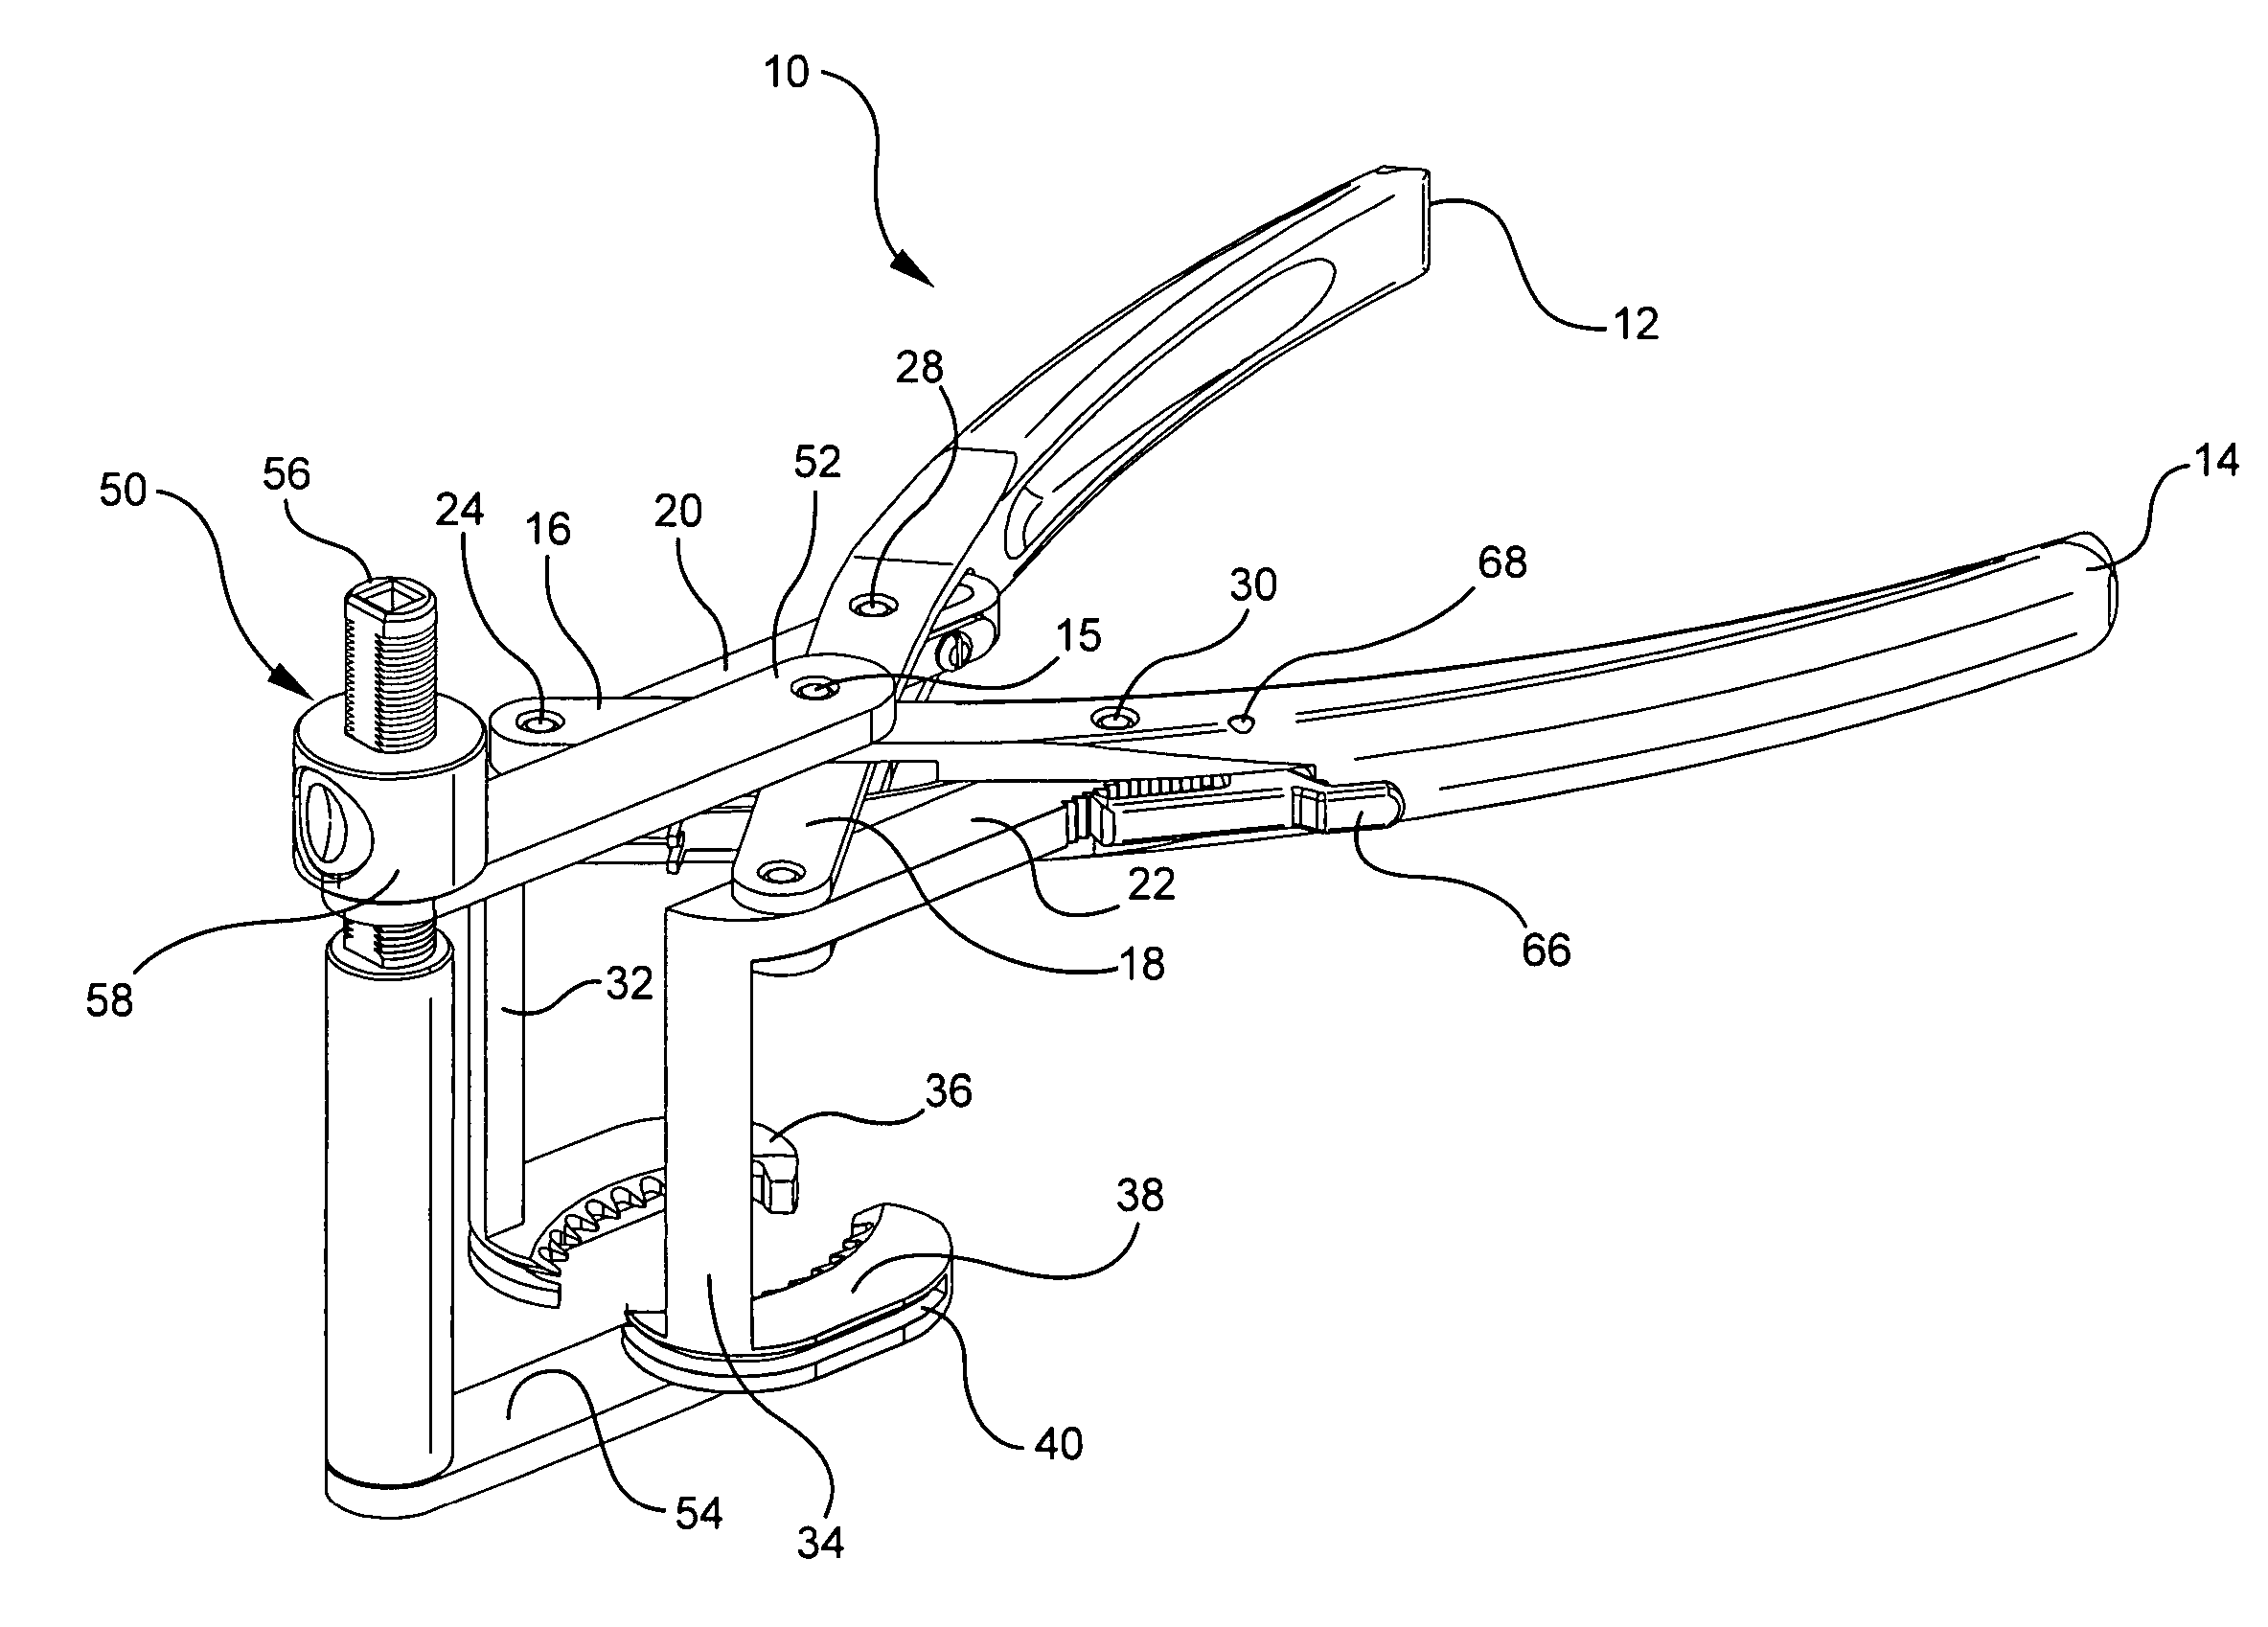 Patella resection clamp